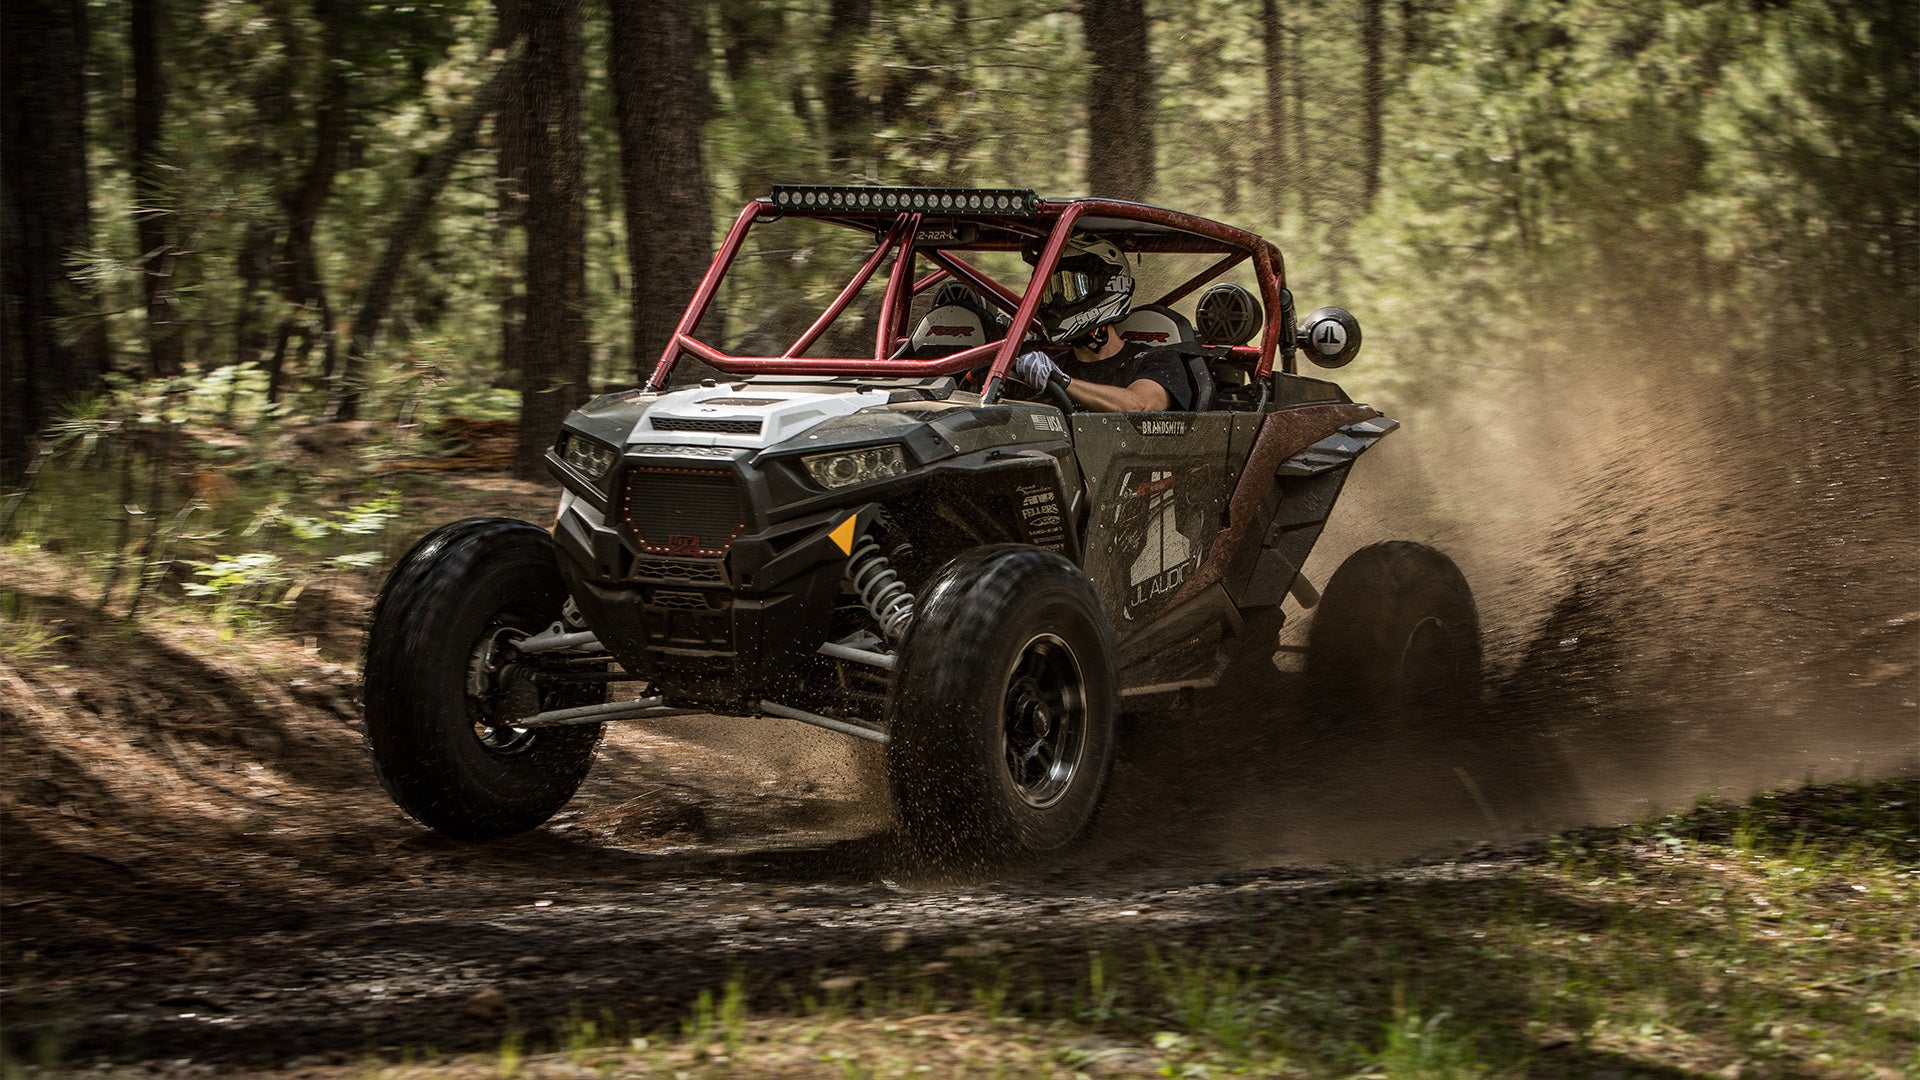 A powersports vehicle with Stealthbox going through rugged terrain.